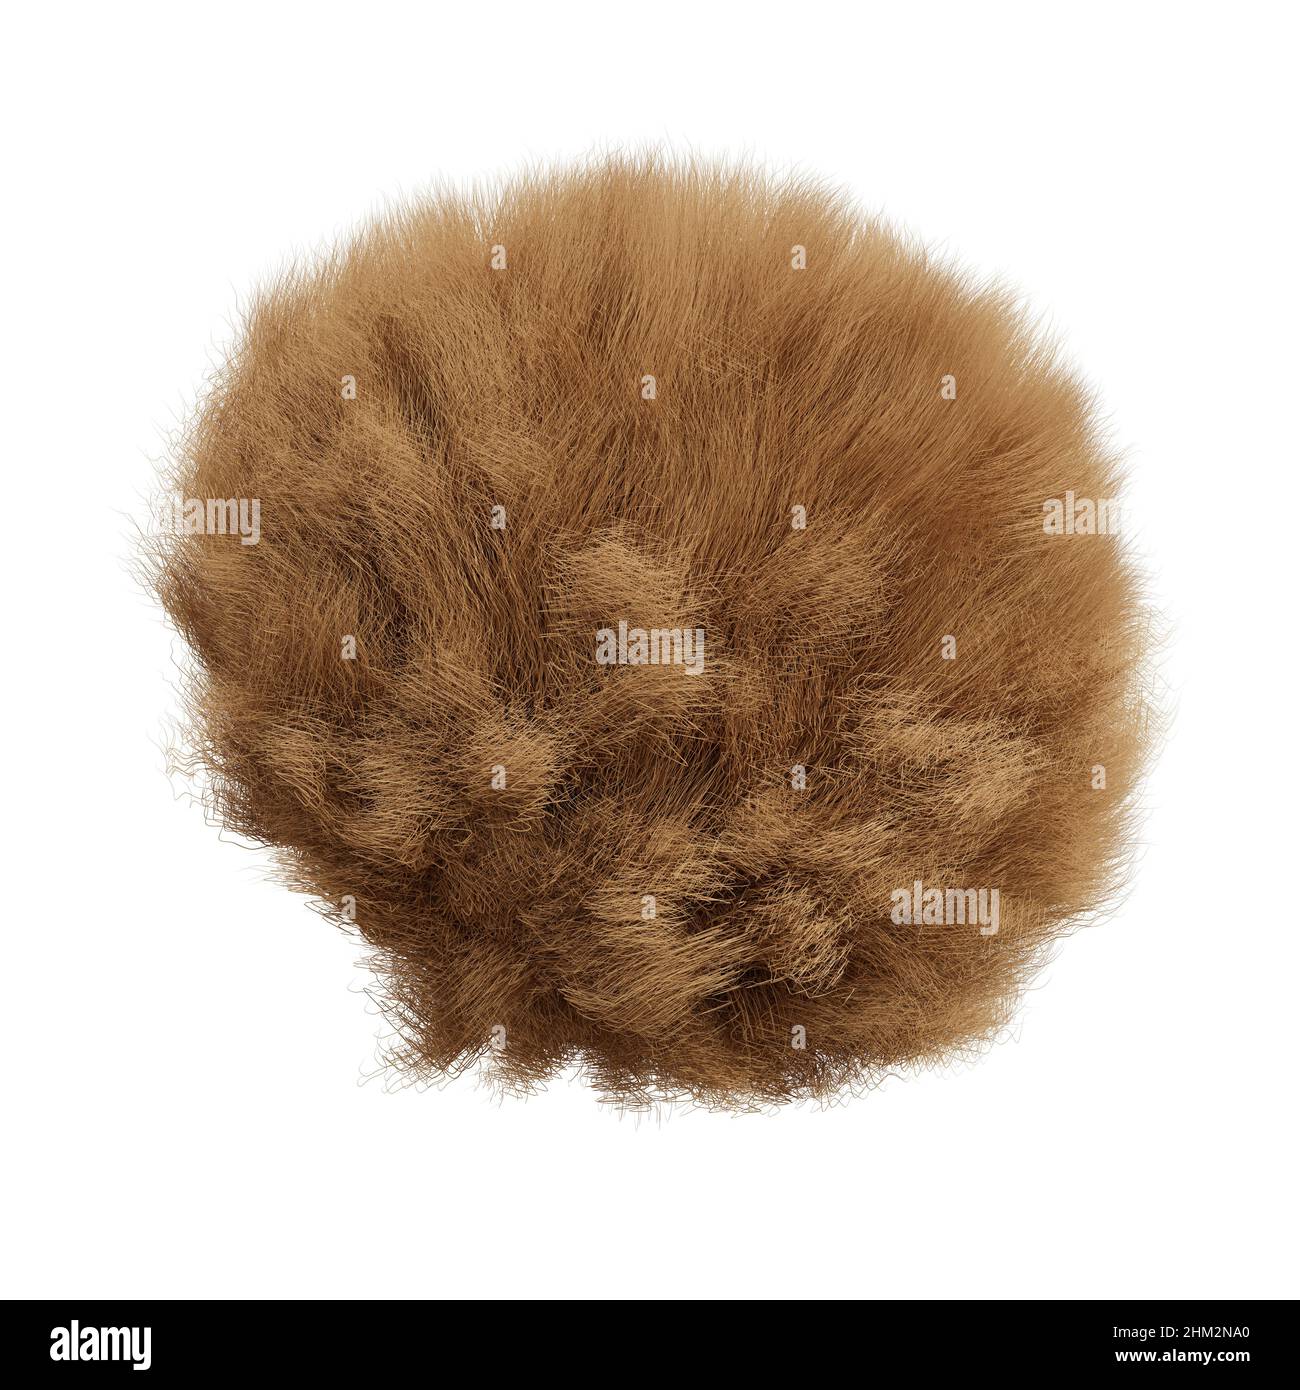 hairy ball, furry brown sphere isolated on white background Stock Photo